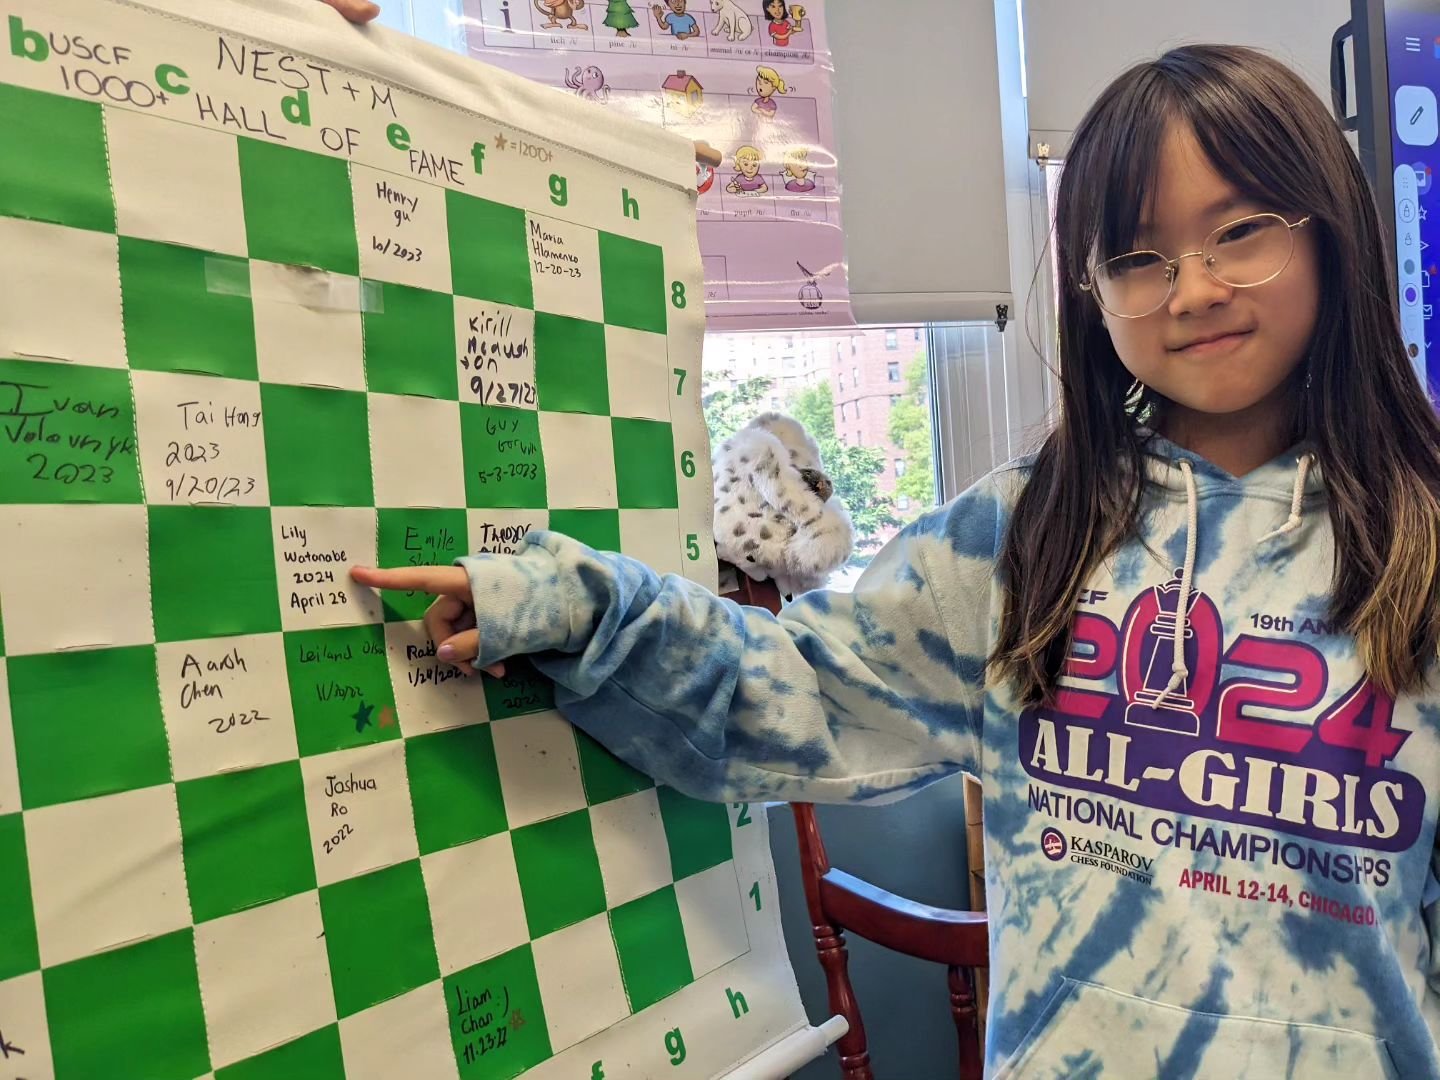 Congratulations to Lily! Her chess training during spring break now puts her at a peak 1102 USCF rating, and we are proud to have her join our club Hall of Fame board ☺️👑

@nestmsoars #1000plususcf #halloffame #chessqueen